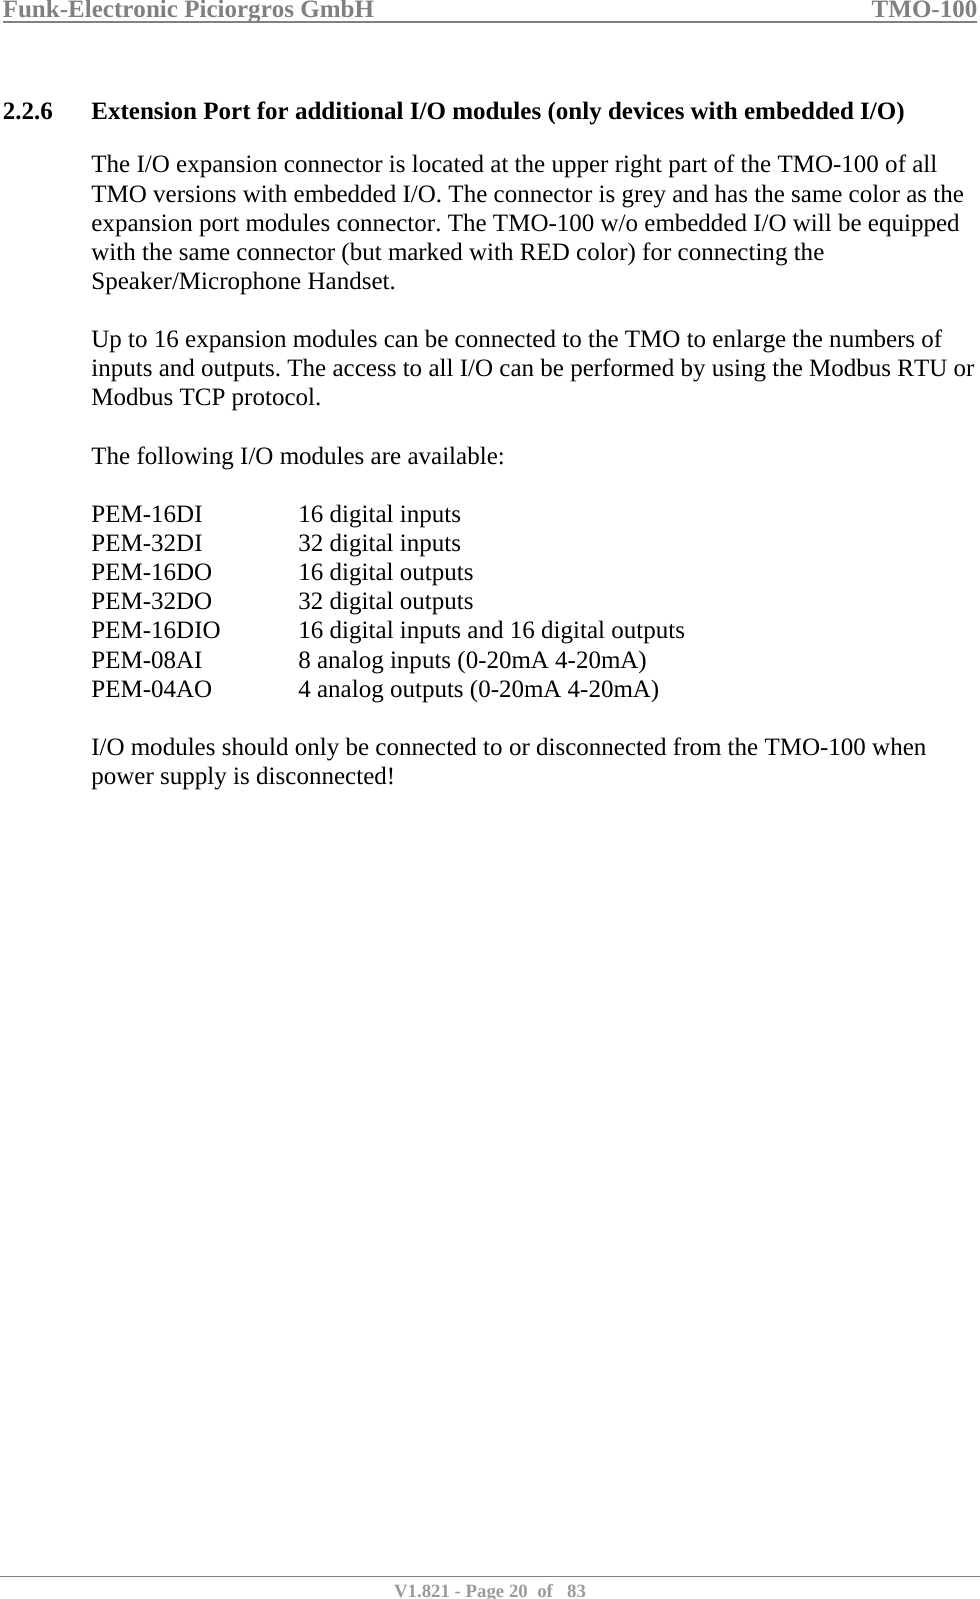 Funk-Electronic Piciorgros GmbH   TMO-100   V1.821 - Page 20  of   83   2.2.6 Extension Port for additional I/O modules (only devices with embedded I/O) The I/O expansion connector is located at the upper right part of the TMO-100 of all TMO versions with embedded I/O. The connector is grey and has the same color as the expansion port modules connector. The TMO-100 w/o embedded I/O will be equipped with the same connector (but marked with RED color) for connecting the Speaker/Microphone Handset.  Up to 16 expansion modules can be connected to the TMO to enlarge the numbers of inputs and outputs. The access to all I/O can be performed by using the Modbus RTU or Modbus TCP protocol.  The following I/O modules are available:  PEM-16DI    16 digital inputs PEM-32DI    32 digital inputs PEM-16DO    16 digital outputs PEM-32DO    32 digital outputs PEM-16DIO   16 digital inputs and 16 digital outputs PEM-08AI    8 analog inputs (0-20mA 4-20mA) PEM-04AO    4 analog outputs (0-20mA 4-20mA)  I/O modules should only be connected to or disconnected from the TMO-100 when power supply is disconnected!  